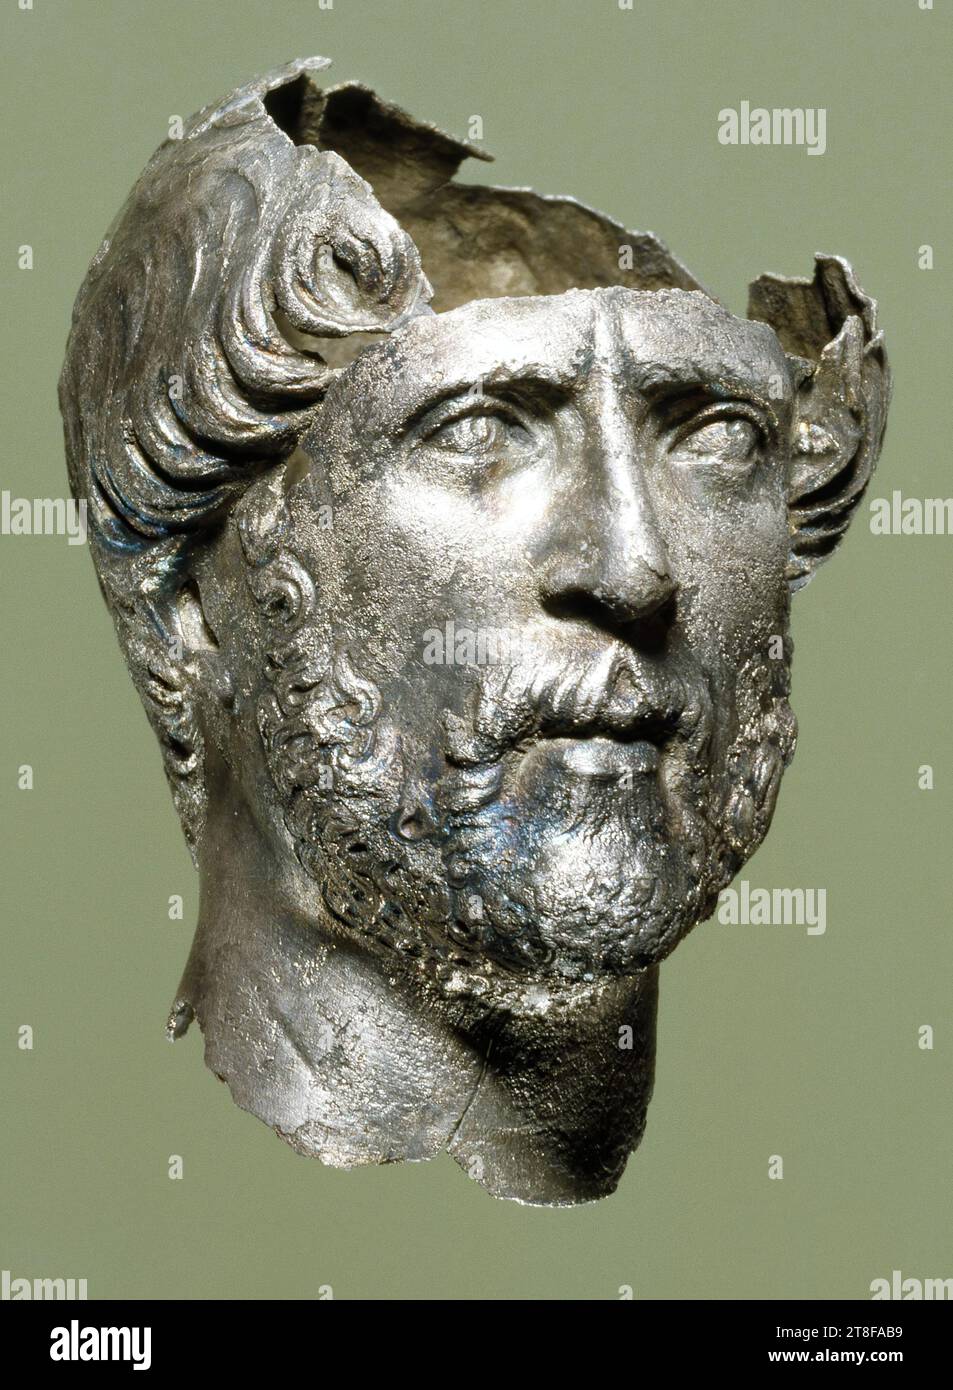 Miniature portrait of a man, 100 - 200, Sculpture, Head, Portrait Head, The small silver head represents a figure with curly hair and a full beard and with eyes looking upwards. The curve of the neck and the modest engraving on the back of the head suggest that it derives from a bust that was originally placed in a circular frame. So it is what is known as a tondo portrait Stock Photo